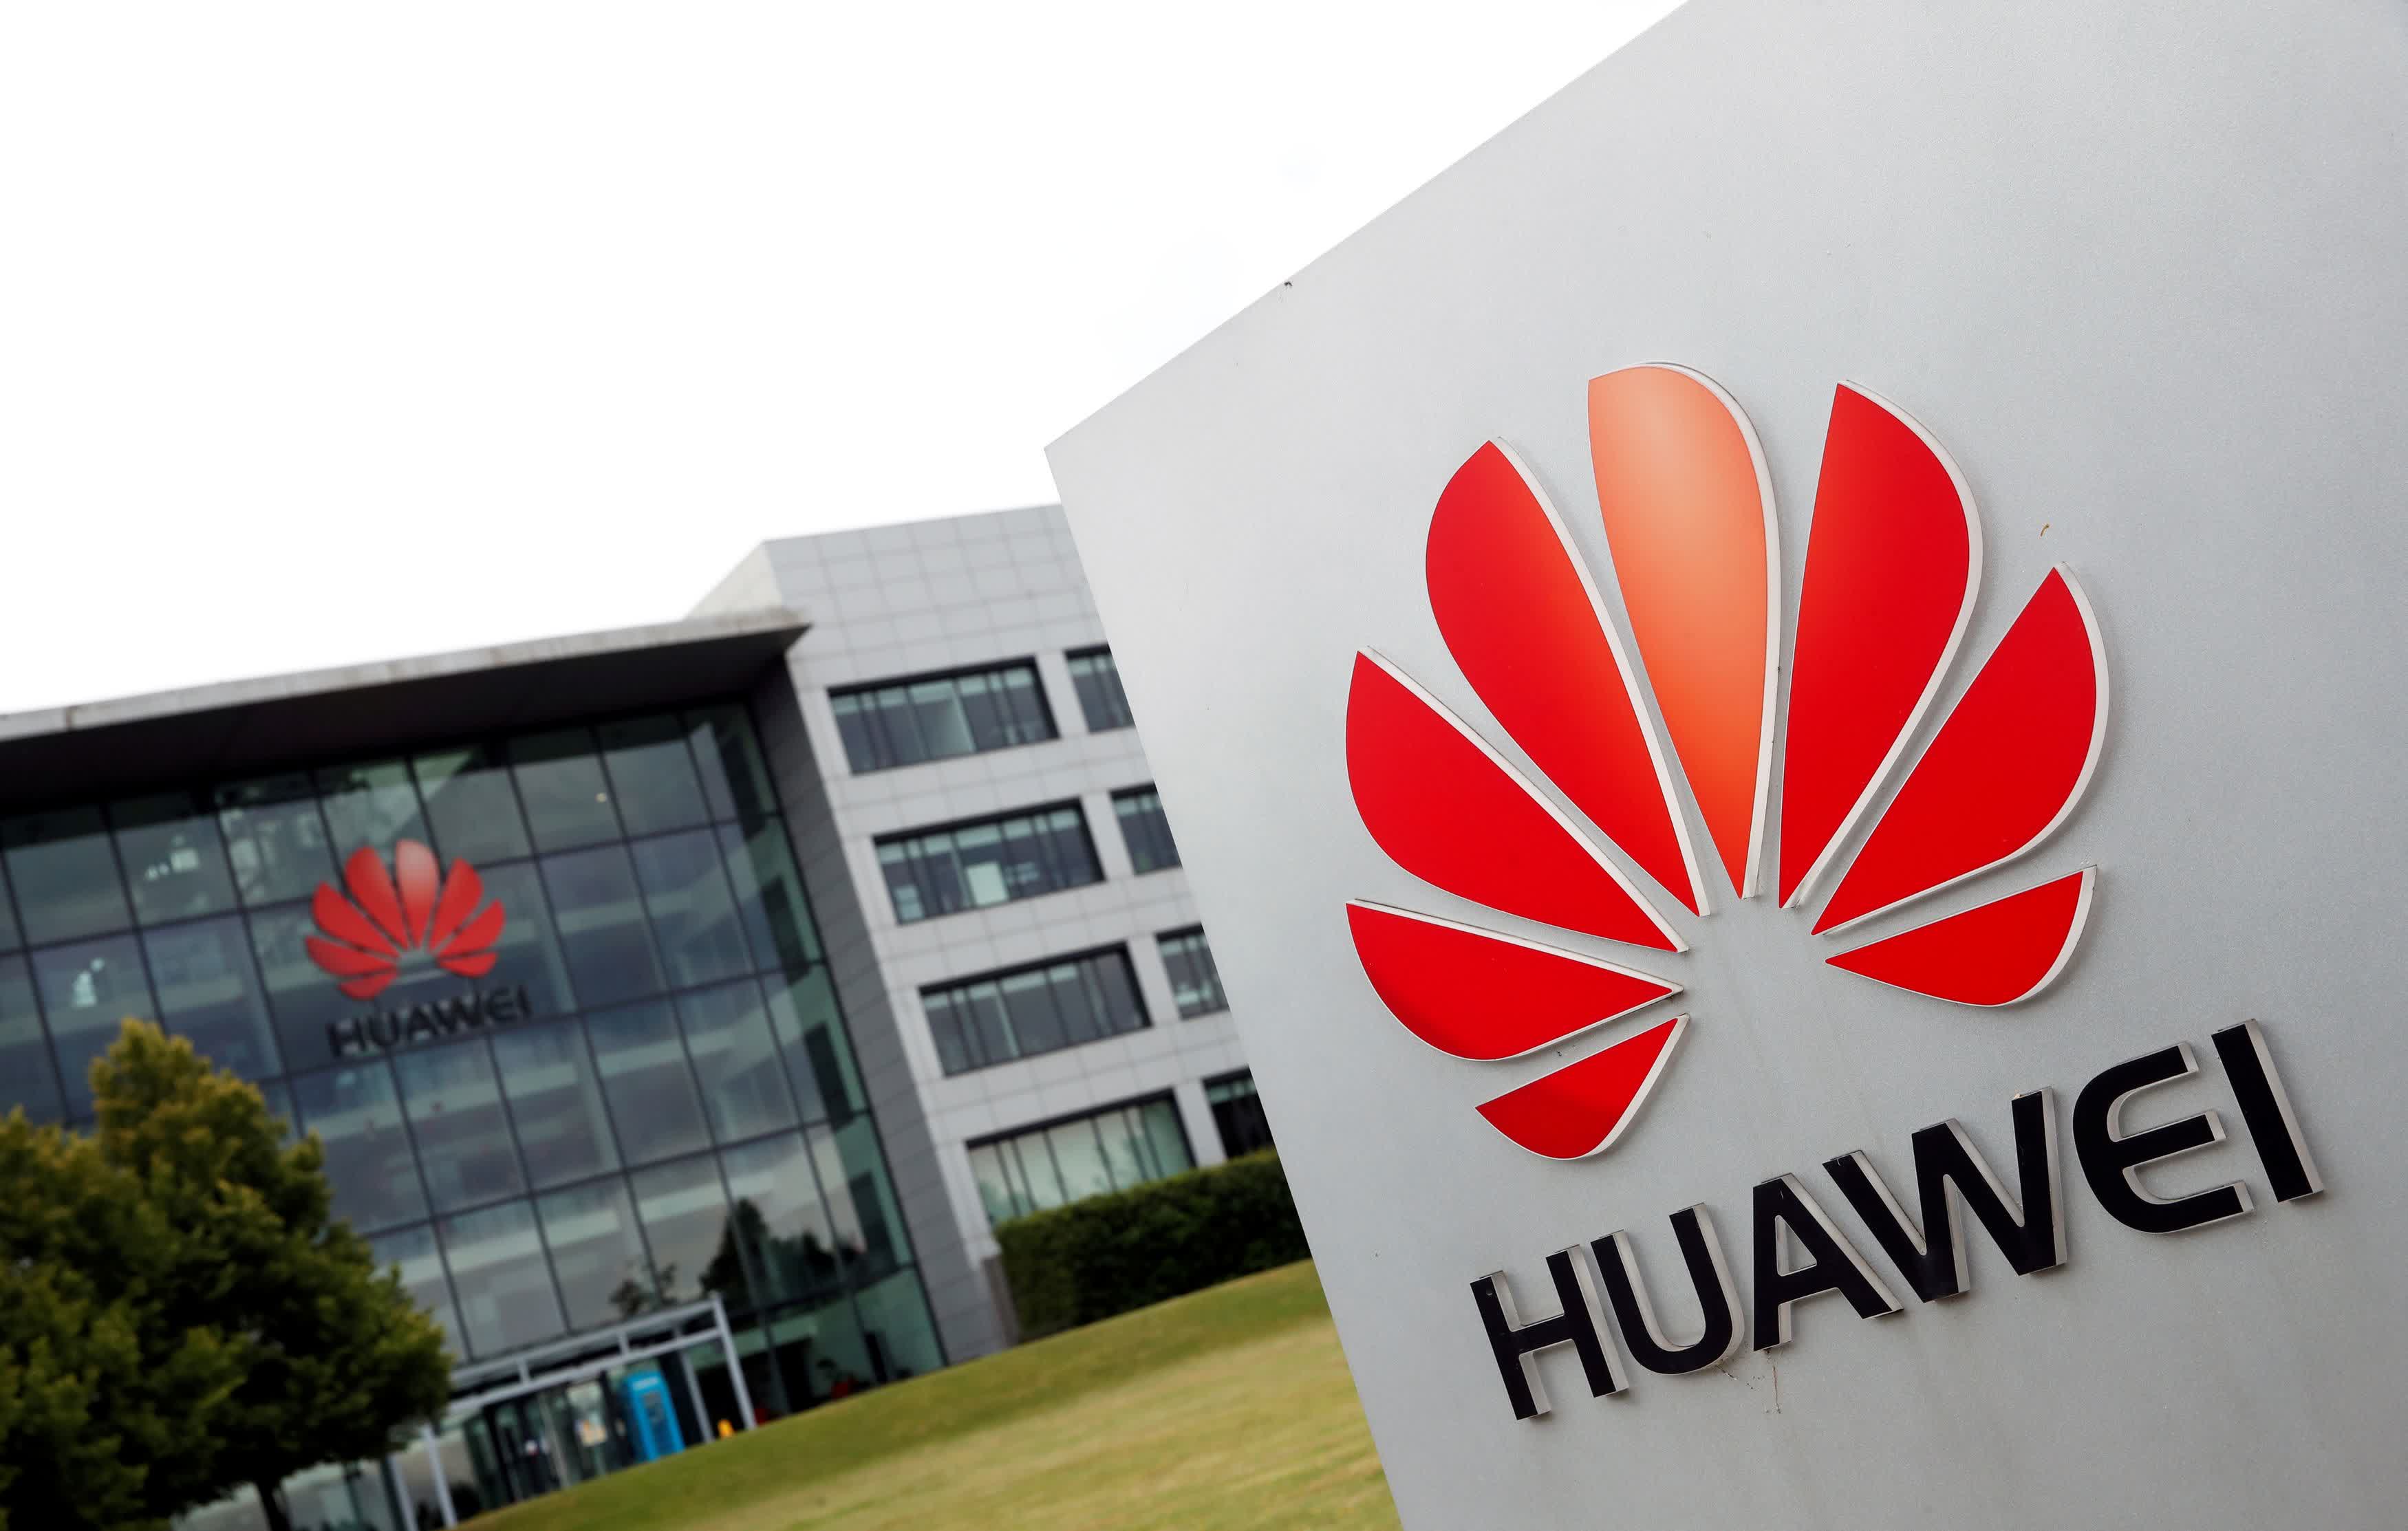 US investigating Huawei over concerns that equipment near military bases could send sensitive data to China